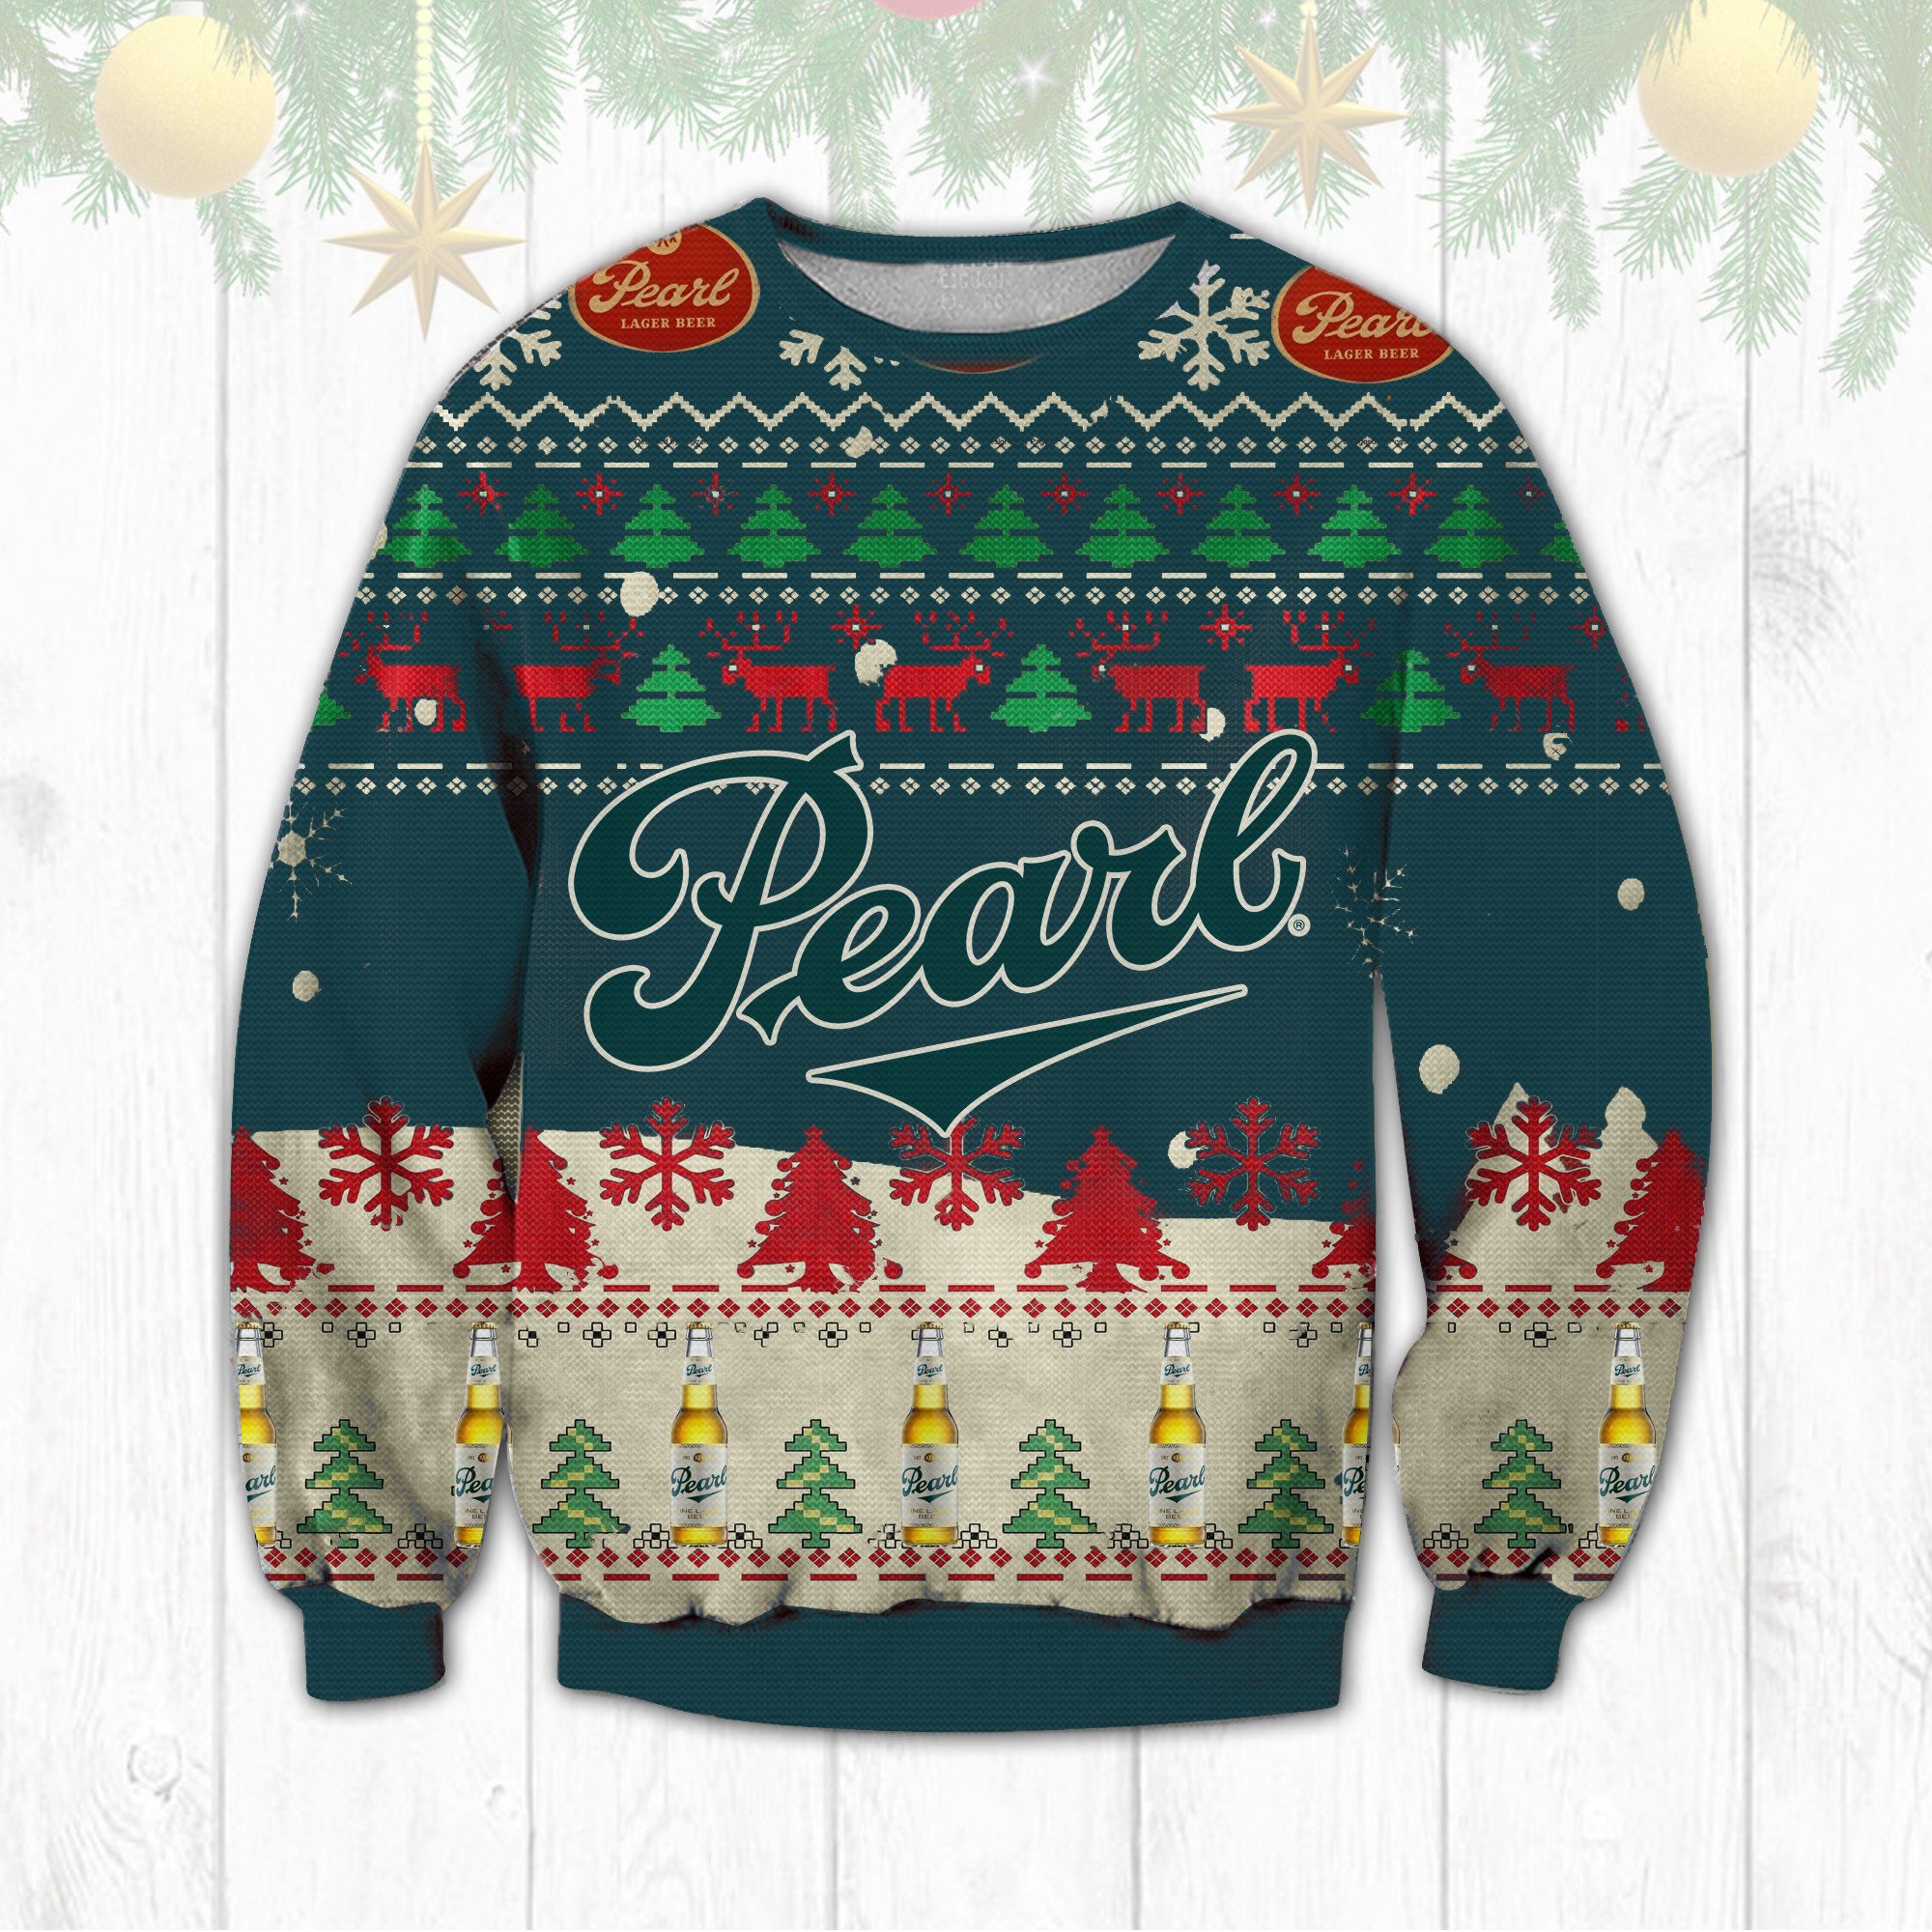 LIMITED Pearl Beer Brewing Company ugly Christmas sweater 8